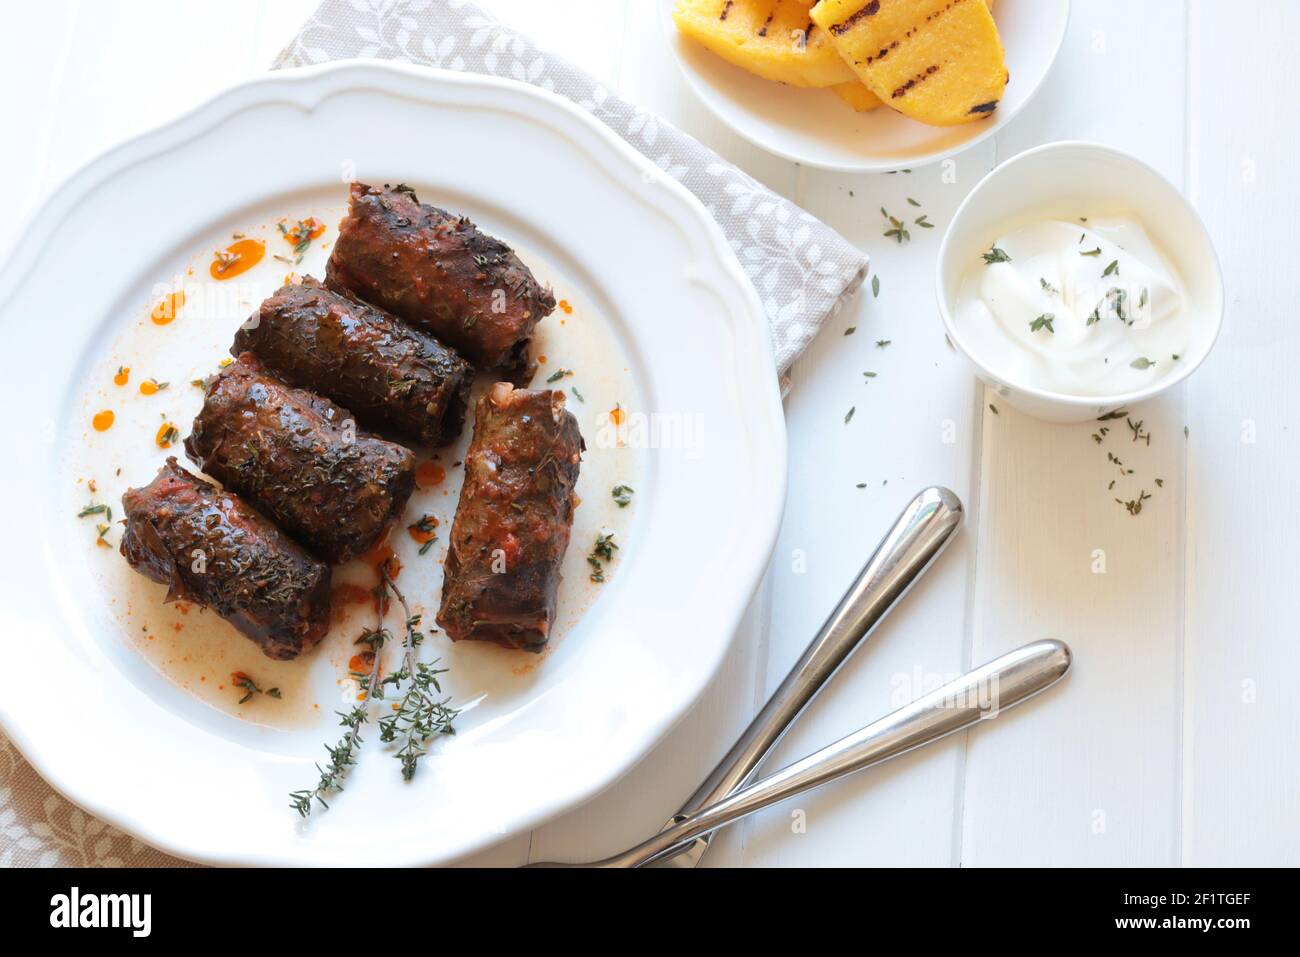 Romanian food. Stuffed Grape Leaves known as Sarmalute in foi de vita on white background. High angle view. Stock Photo